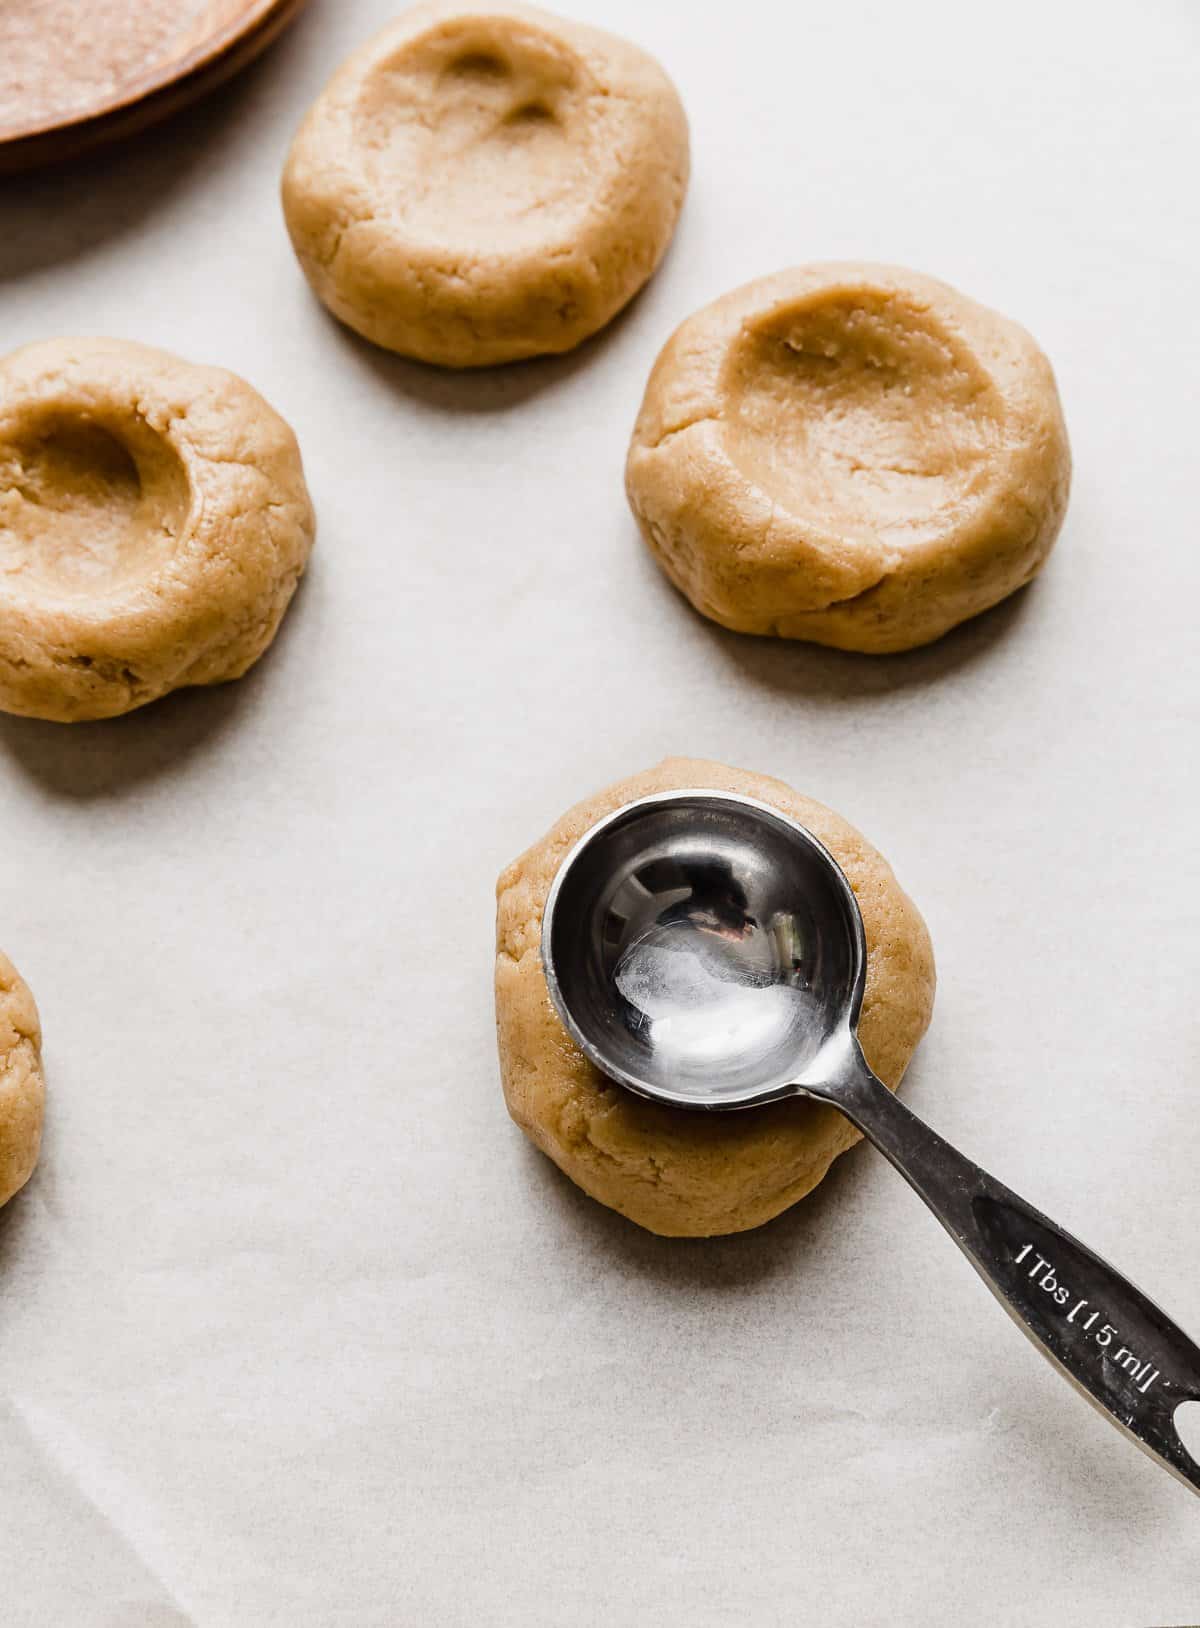 A metal tablespoon sized measuring spoon being pressed into a ball of churro cookie dough to make a copycat Crumbl Hazelnut Churro Cookies.